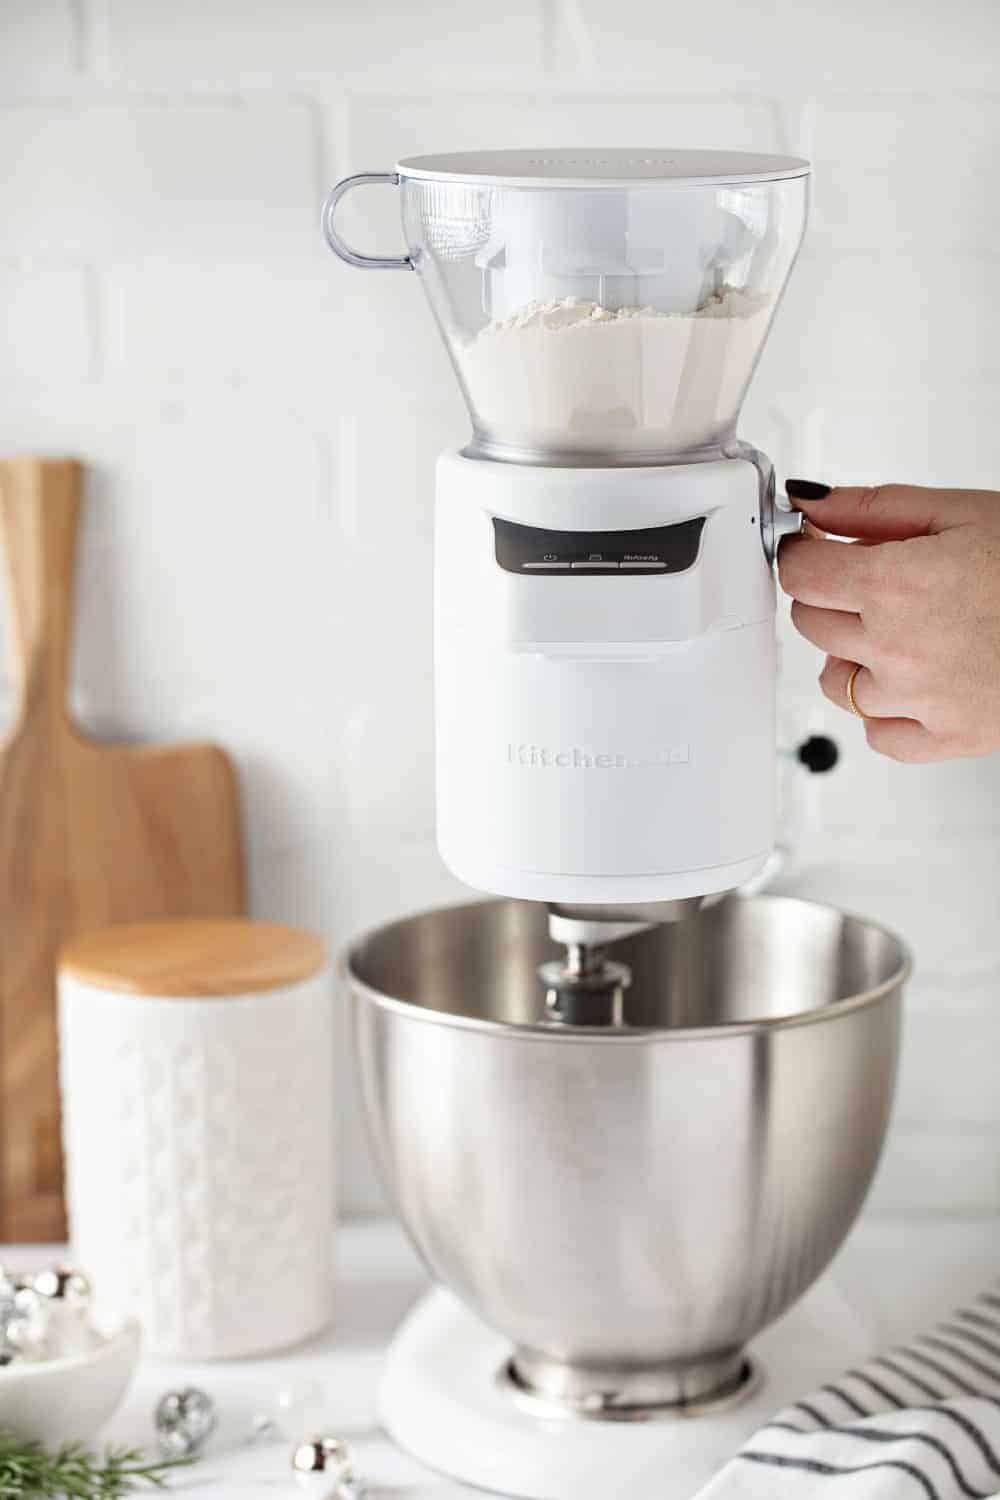 Stand mixer sifter and scale attachment 5KSMSFTA, KitchenAid